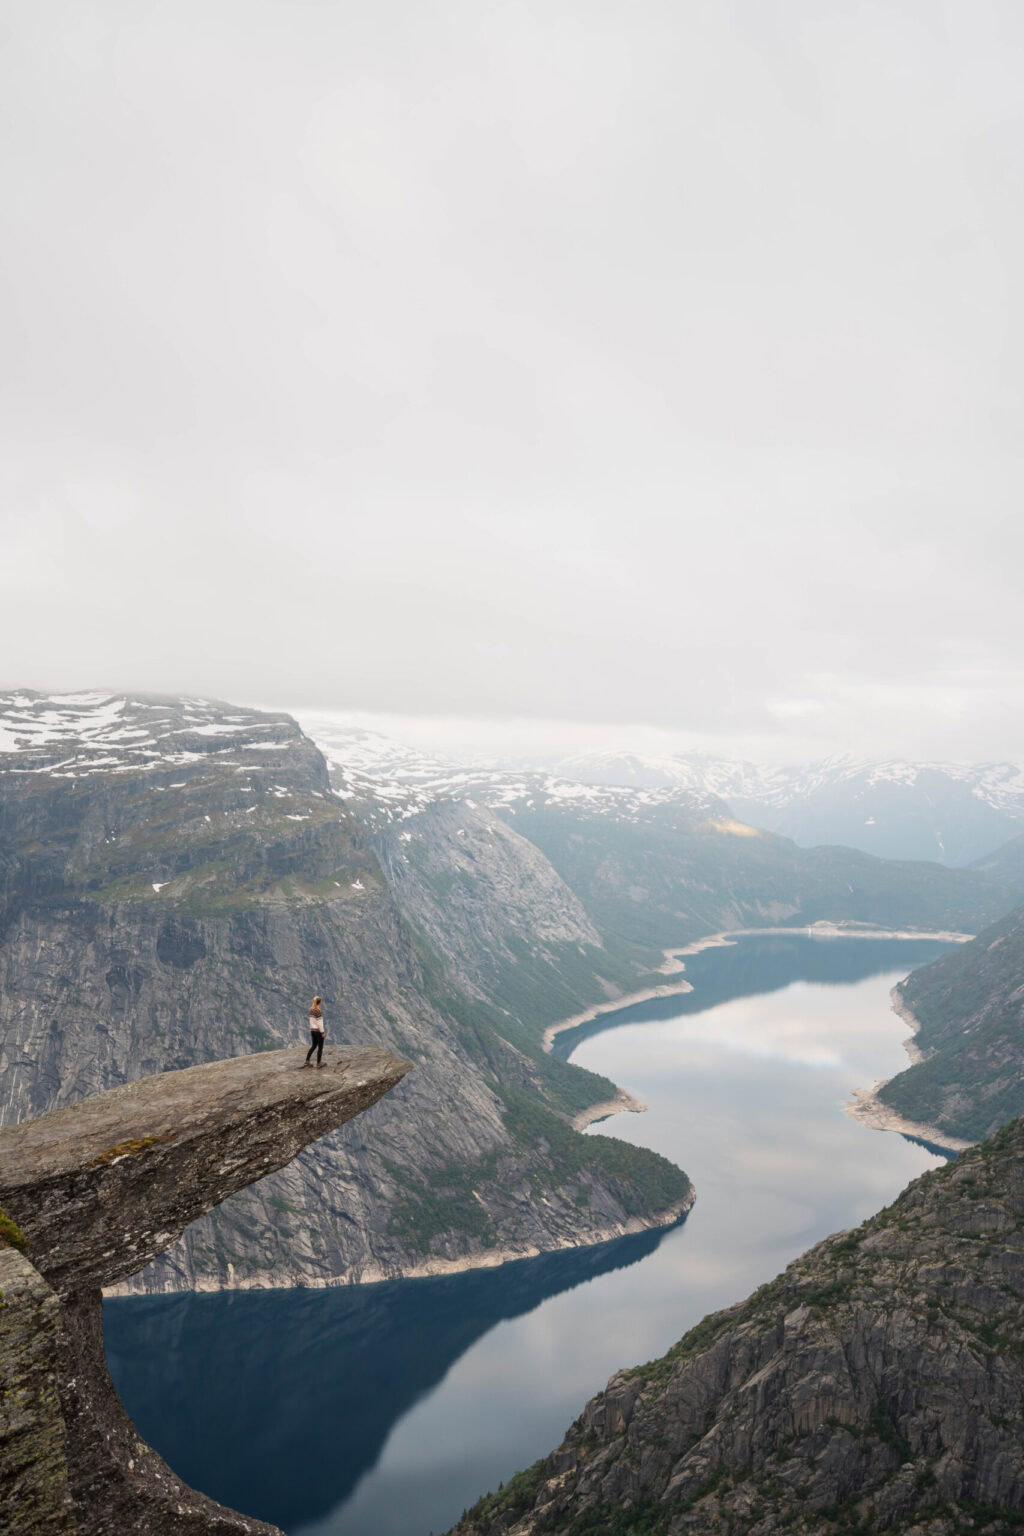 The famous viewpoint: 'Trolltunga' in Norway